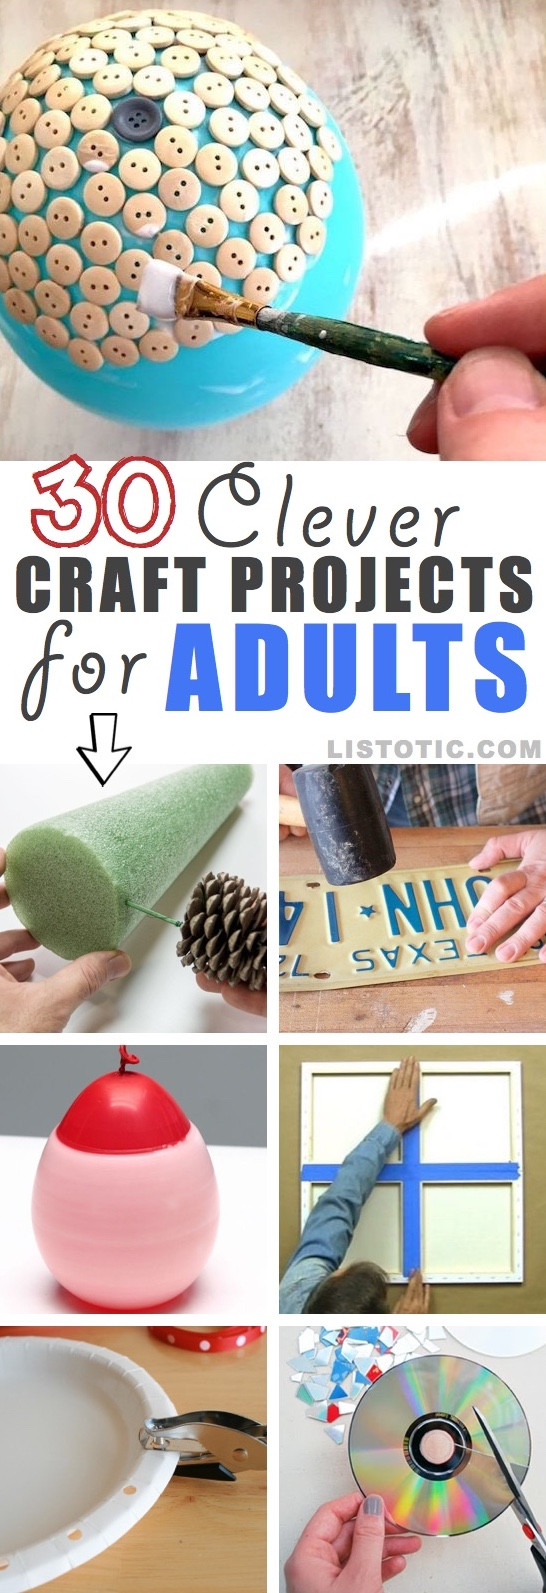 Fun Projects For Adults
 30 Easy Craft Ideas That Will Spark Your Creativity DIY